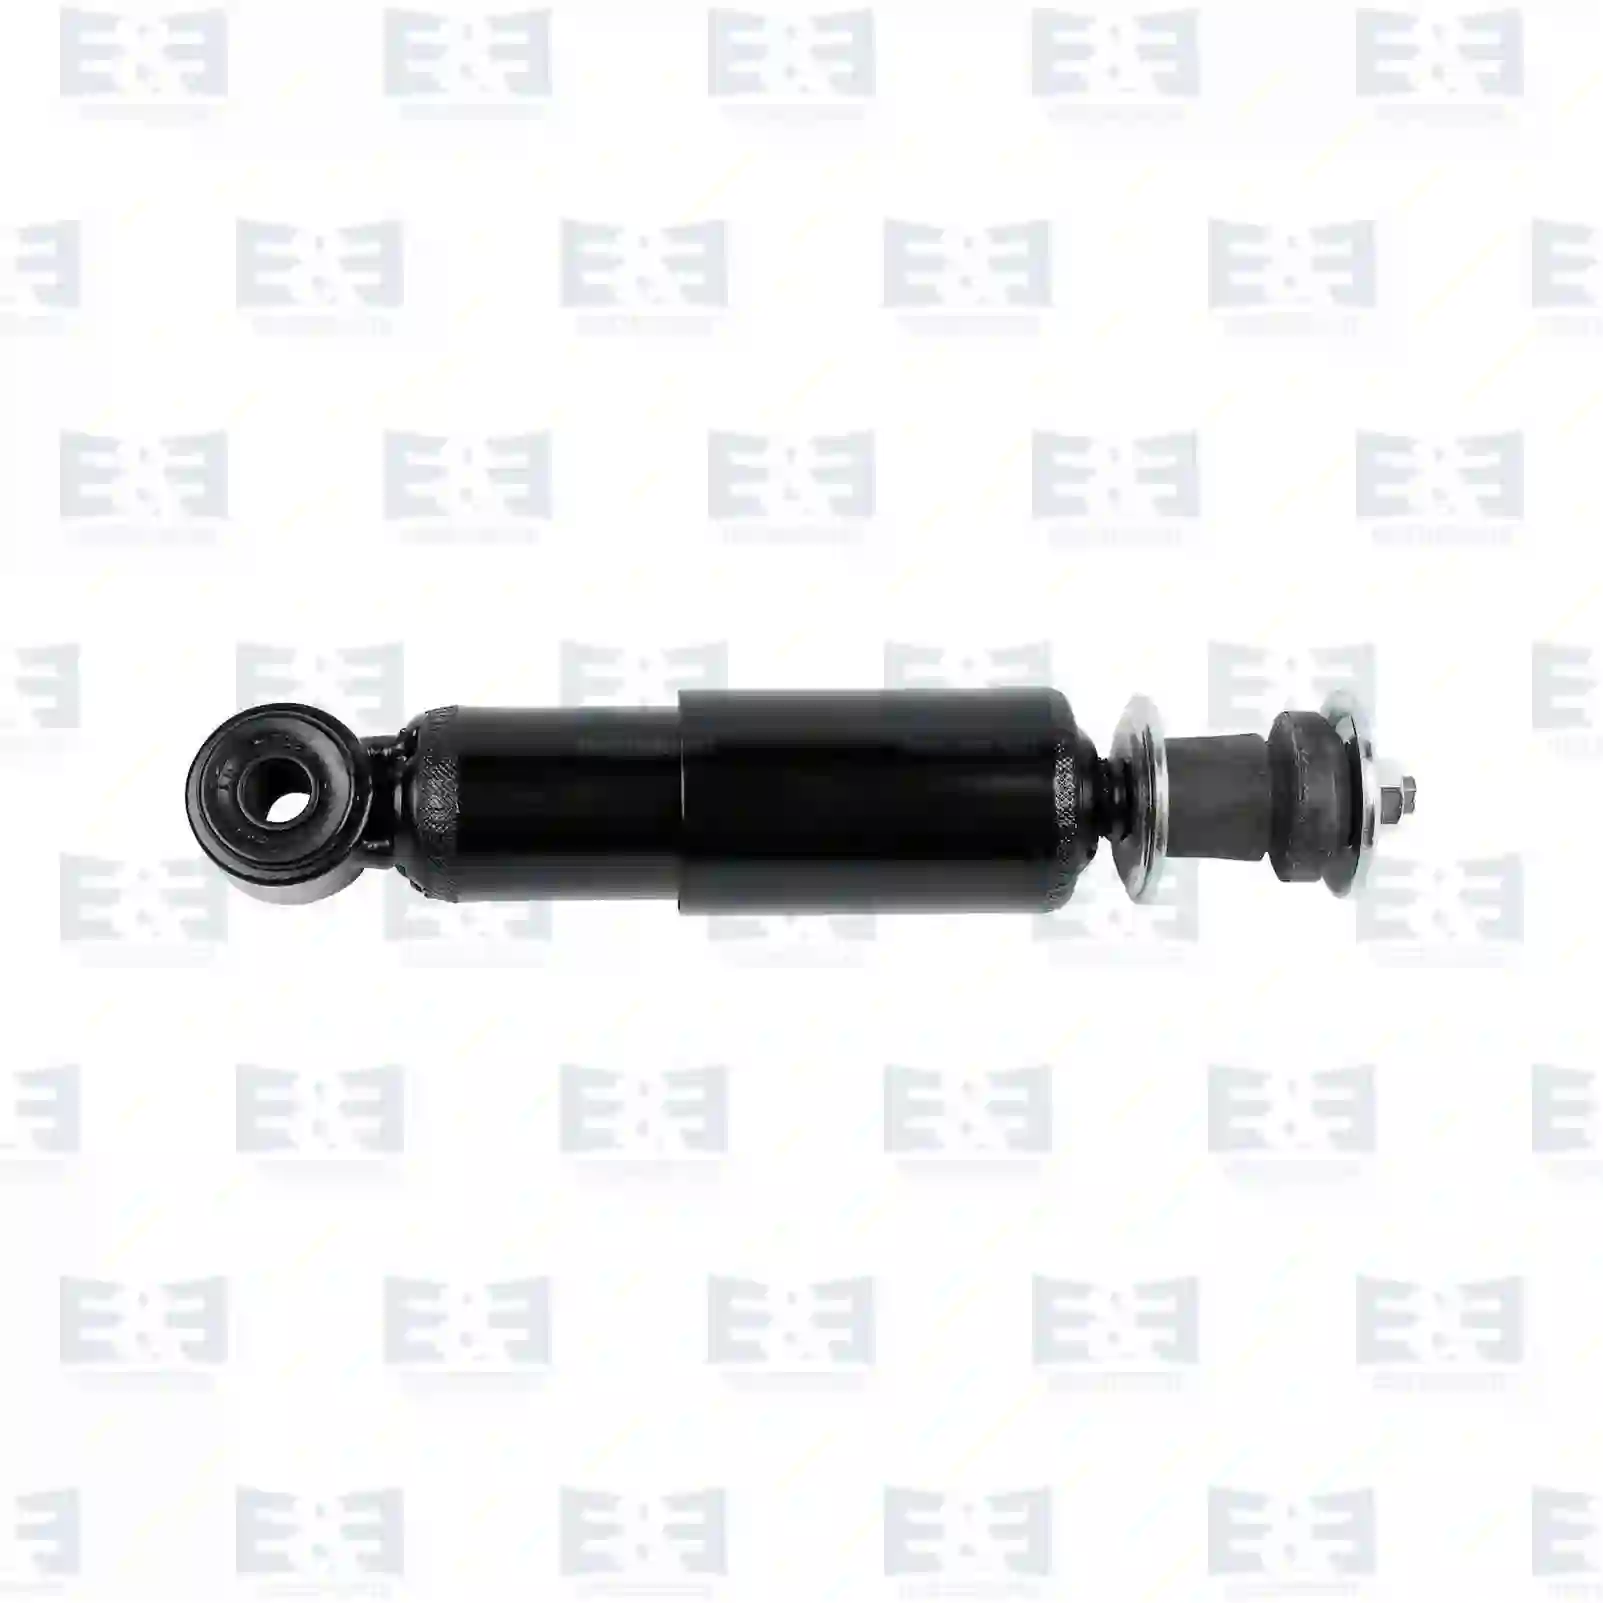 Shock Absorber Cabin shock absorber, EE No 2E2276471 ,  oem no:81437016143, 81437016375, 81437016378, 81437016375 E&E Truck Spare Parts | Truck Spare Parts, Auotomotive Spare Parts